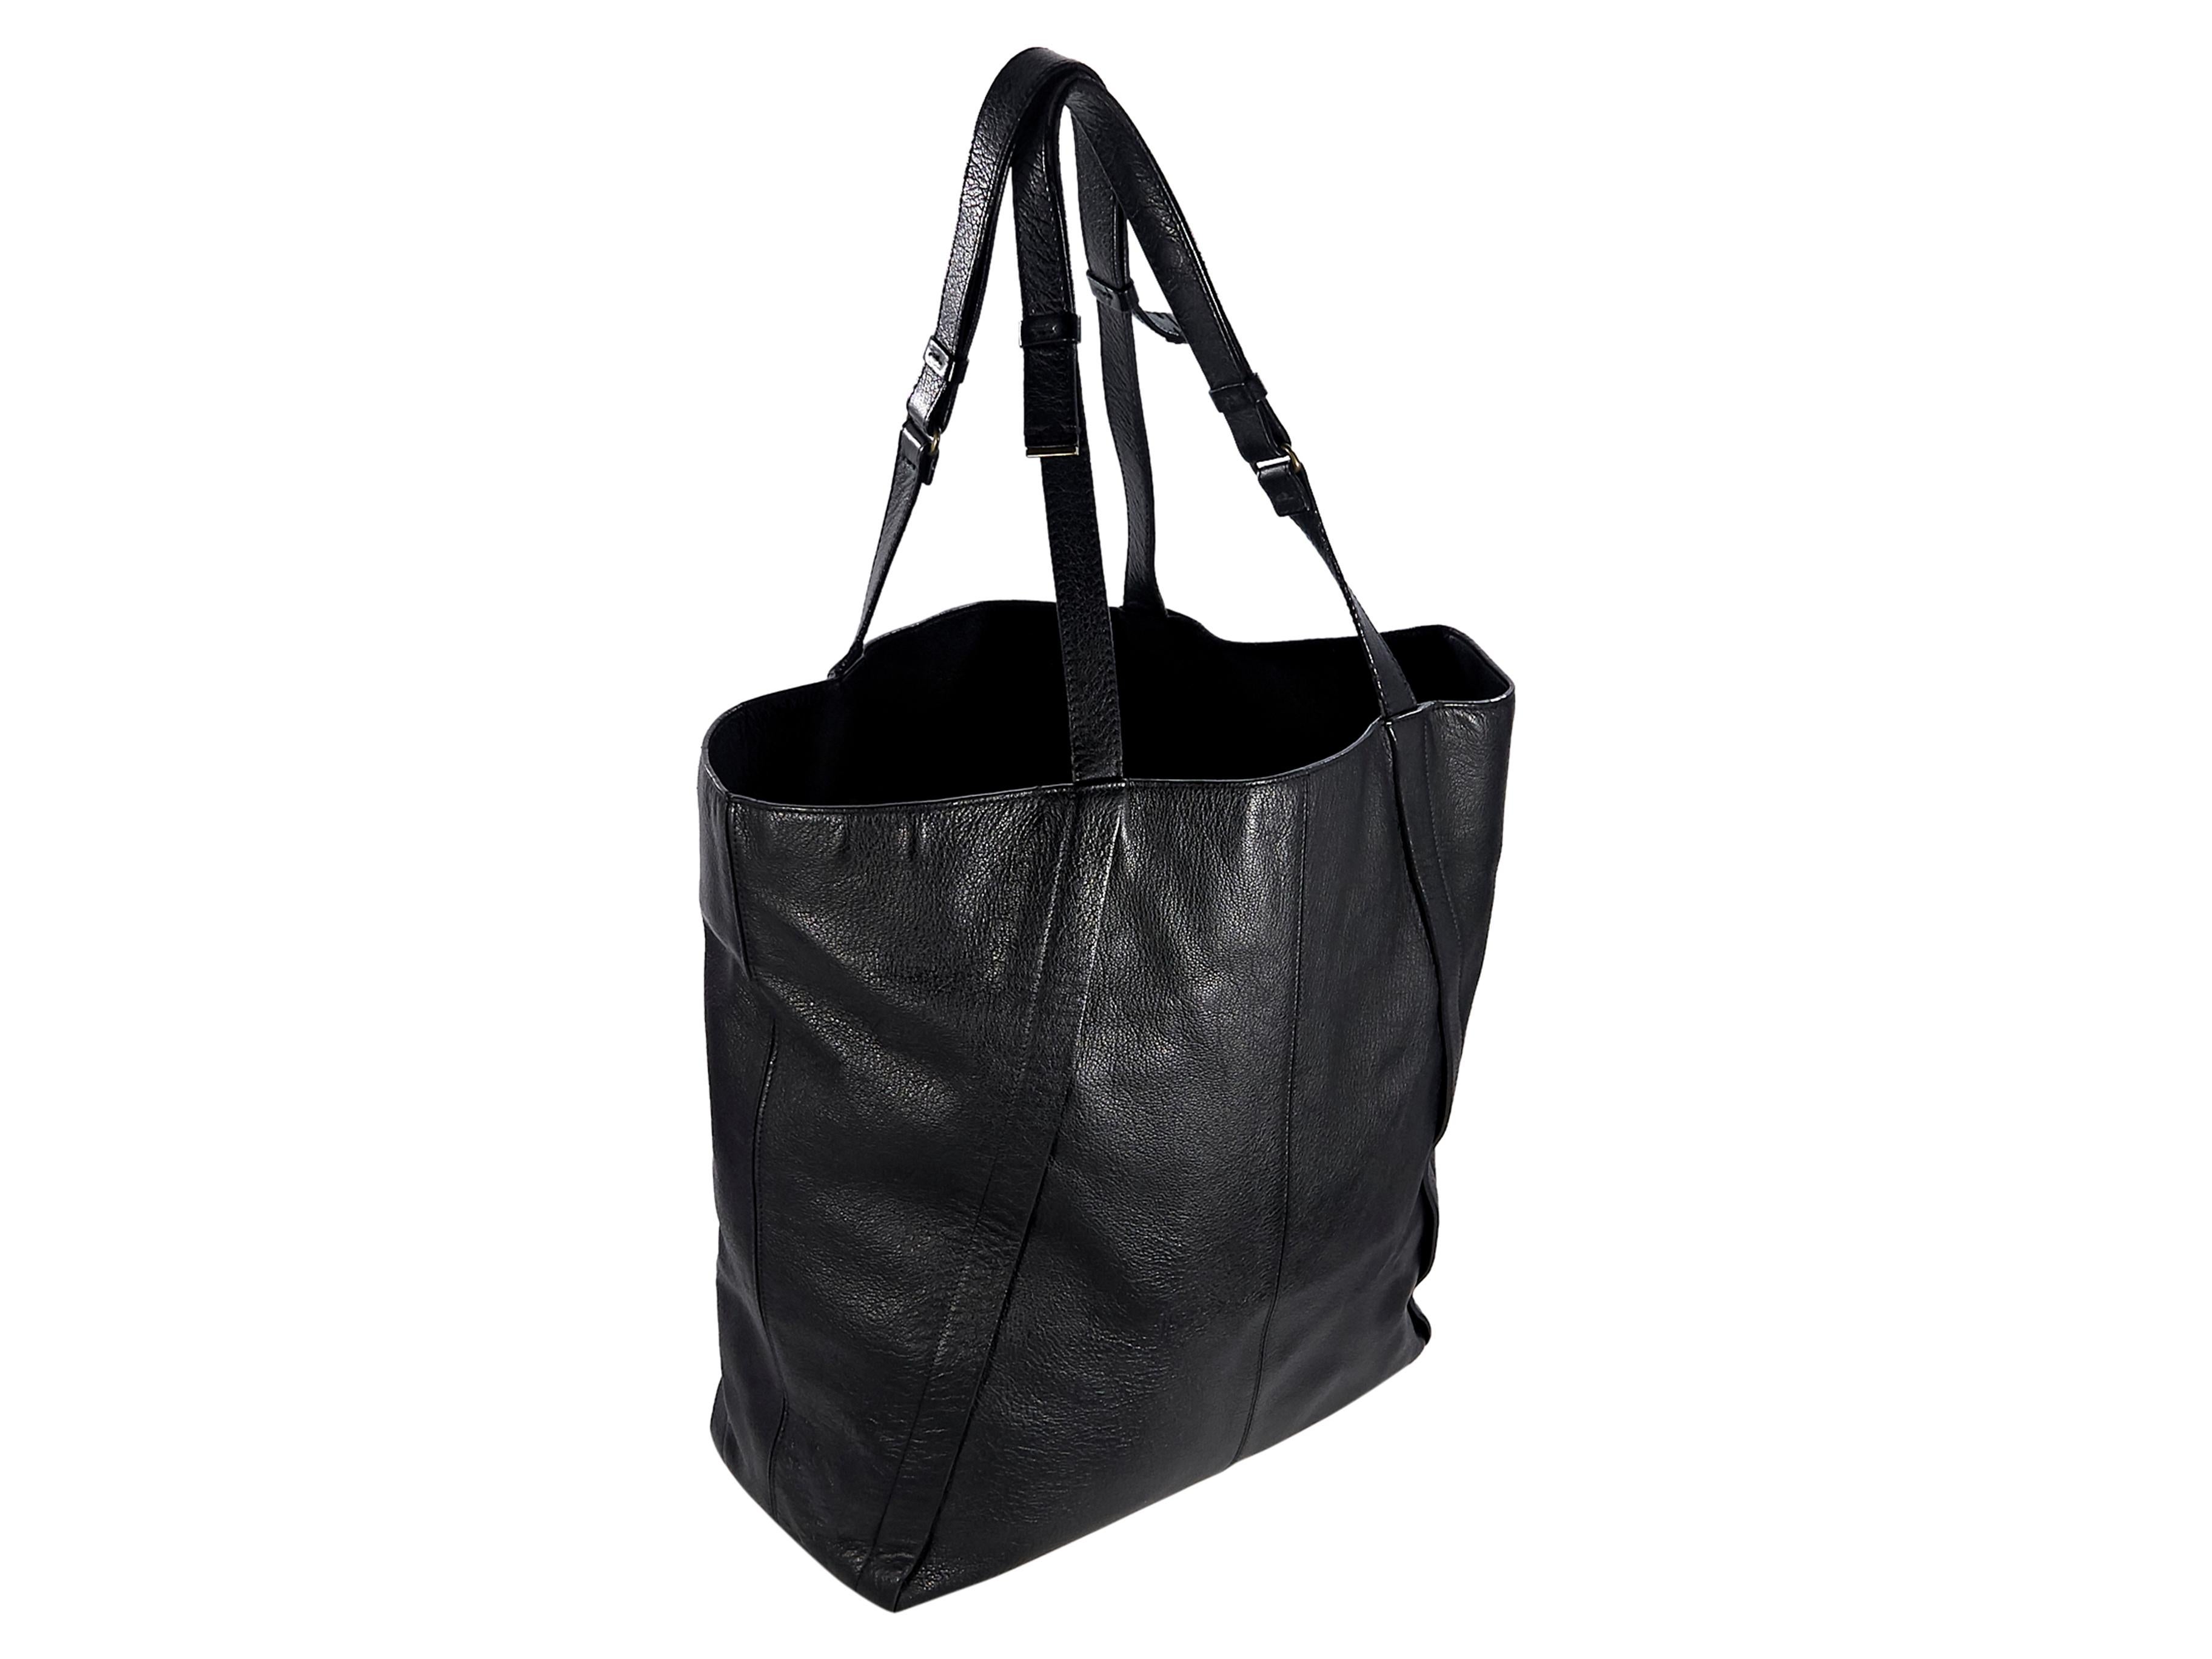 Product details:  Black leather Miss Sartorial tote bag by Lanvin.  Dual shoulder straps.  Open top.  Lined interior with inner zip and slide pockets.  Goldtone hardware.  16.75